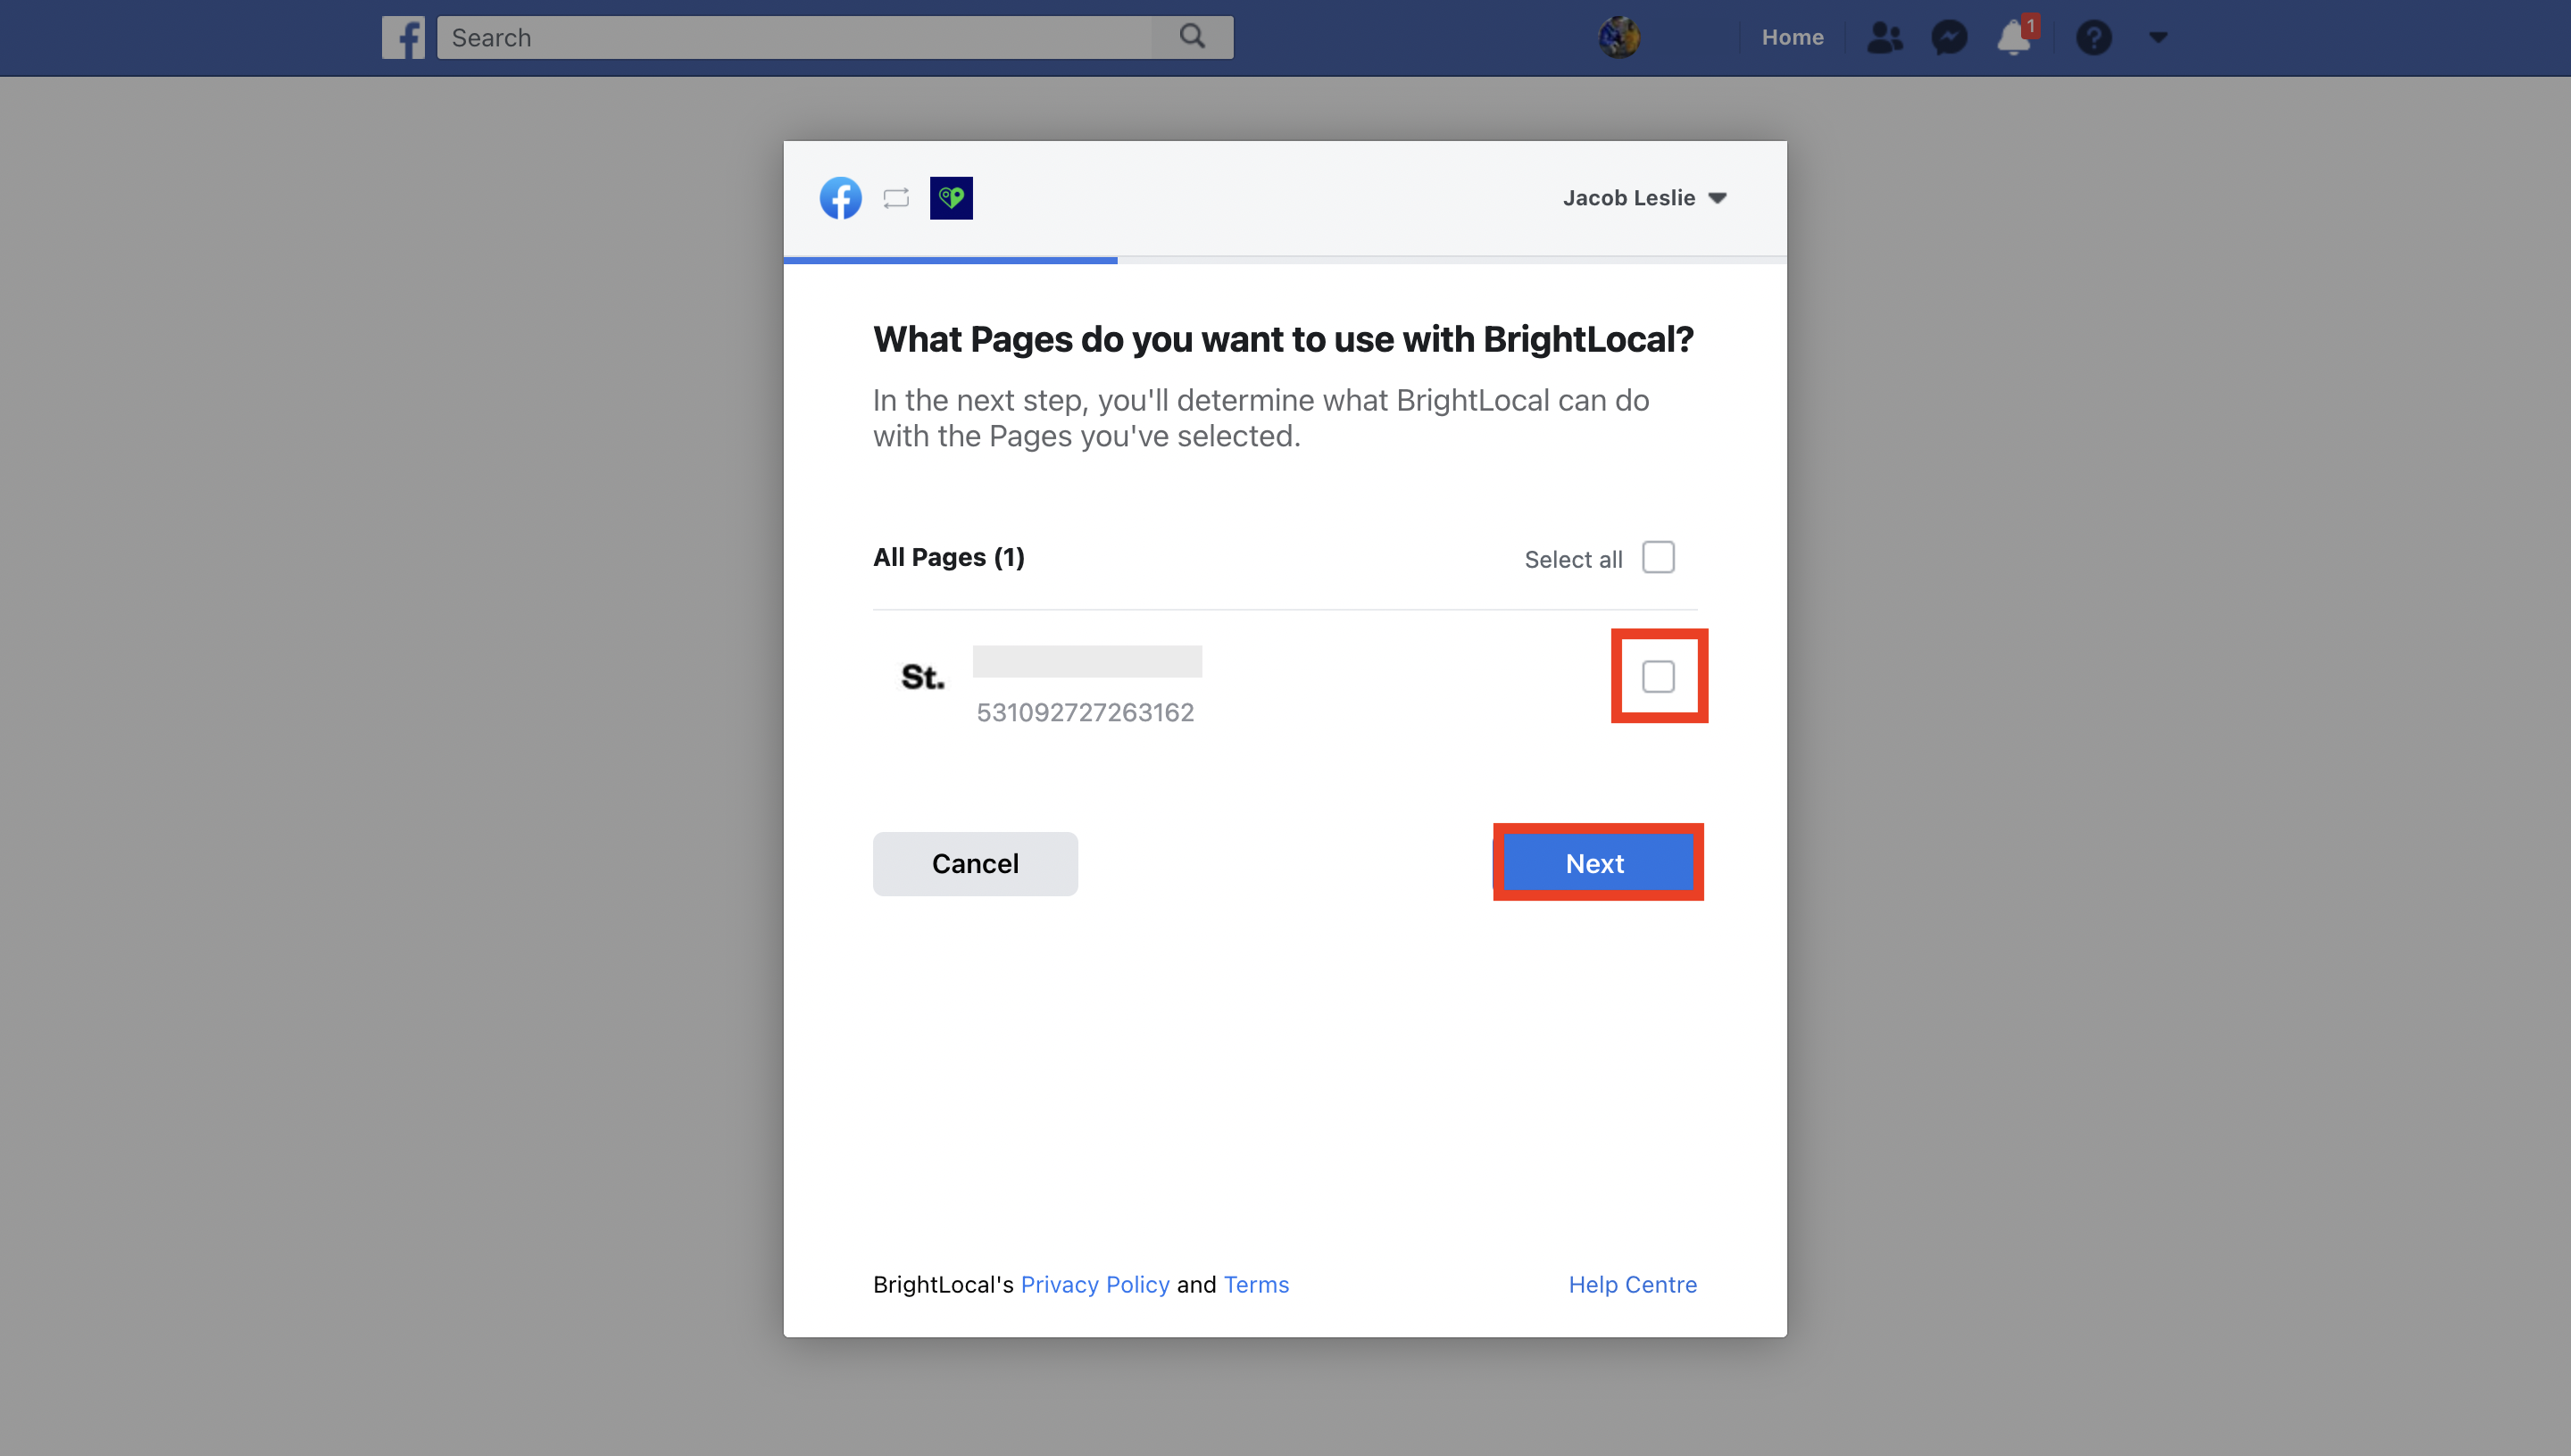 5-How_can_clients_connect_their_Facebook_pages_and_Google_Business_Profiles_to_their_Reputation_Manager_reports_via_External_Dashboard_.png